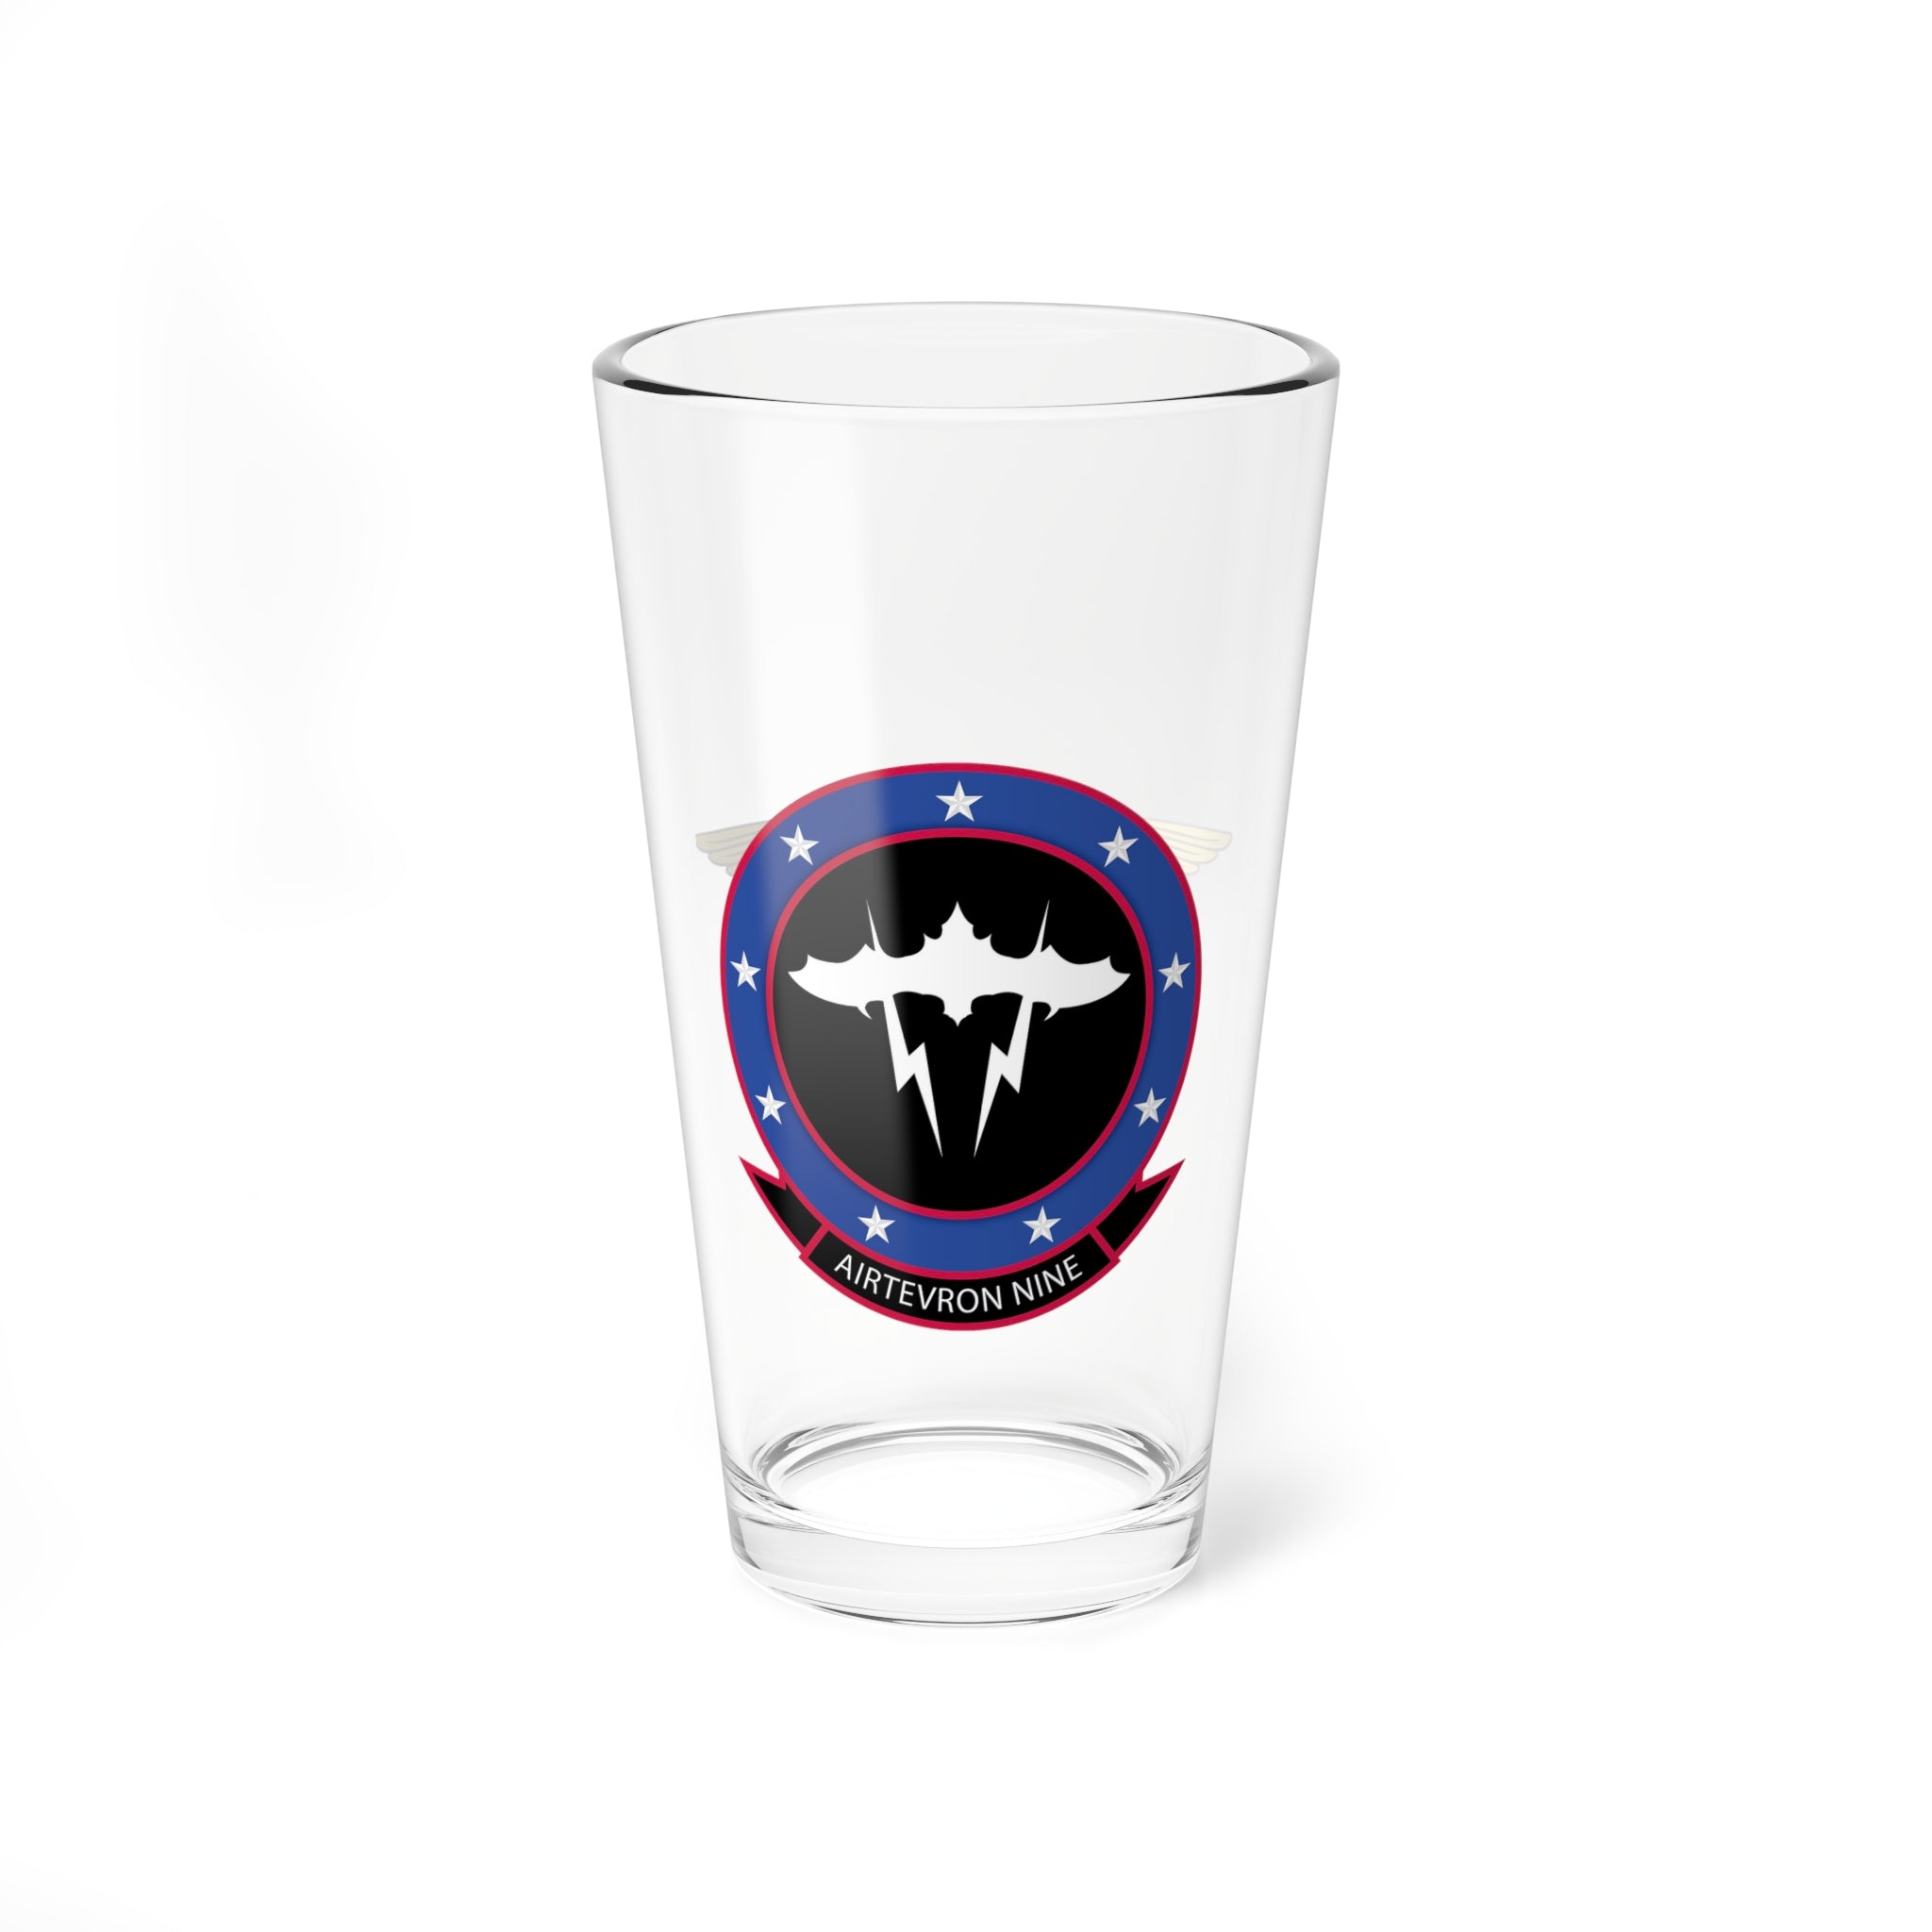 VX-9 "Vampires" NFO Pint Glass, 16oz, Navy Air Test and Evaluation Squadron Nine flying the Super Hornet and Growler